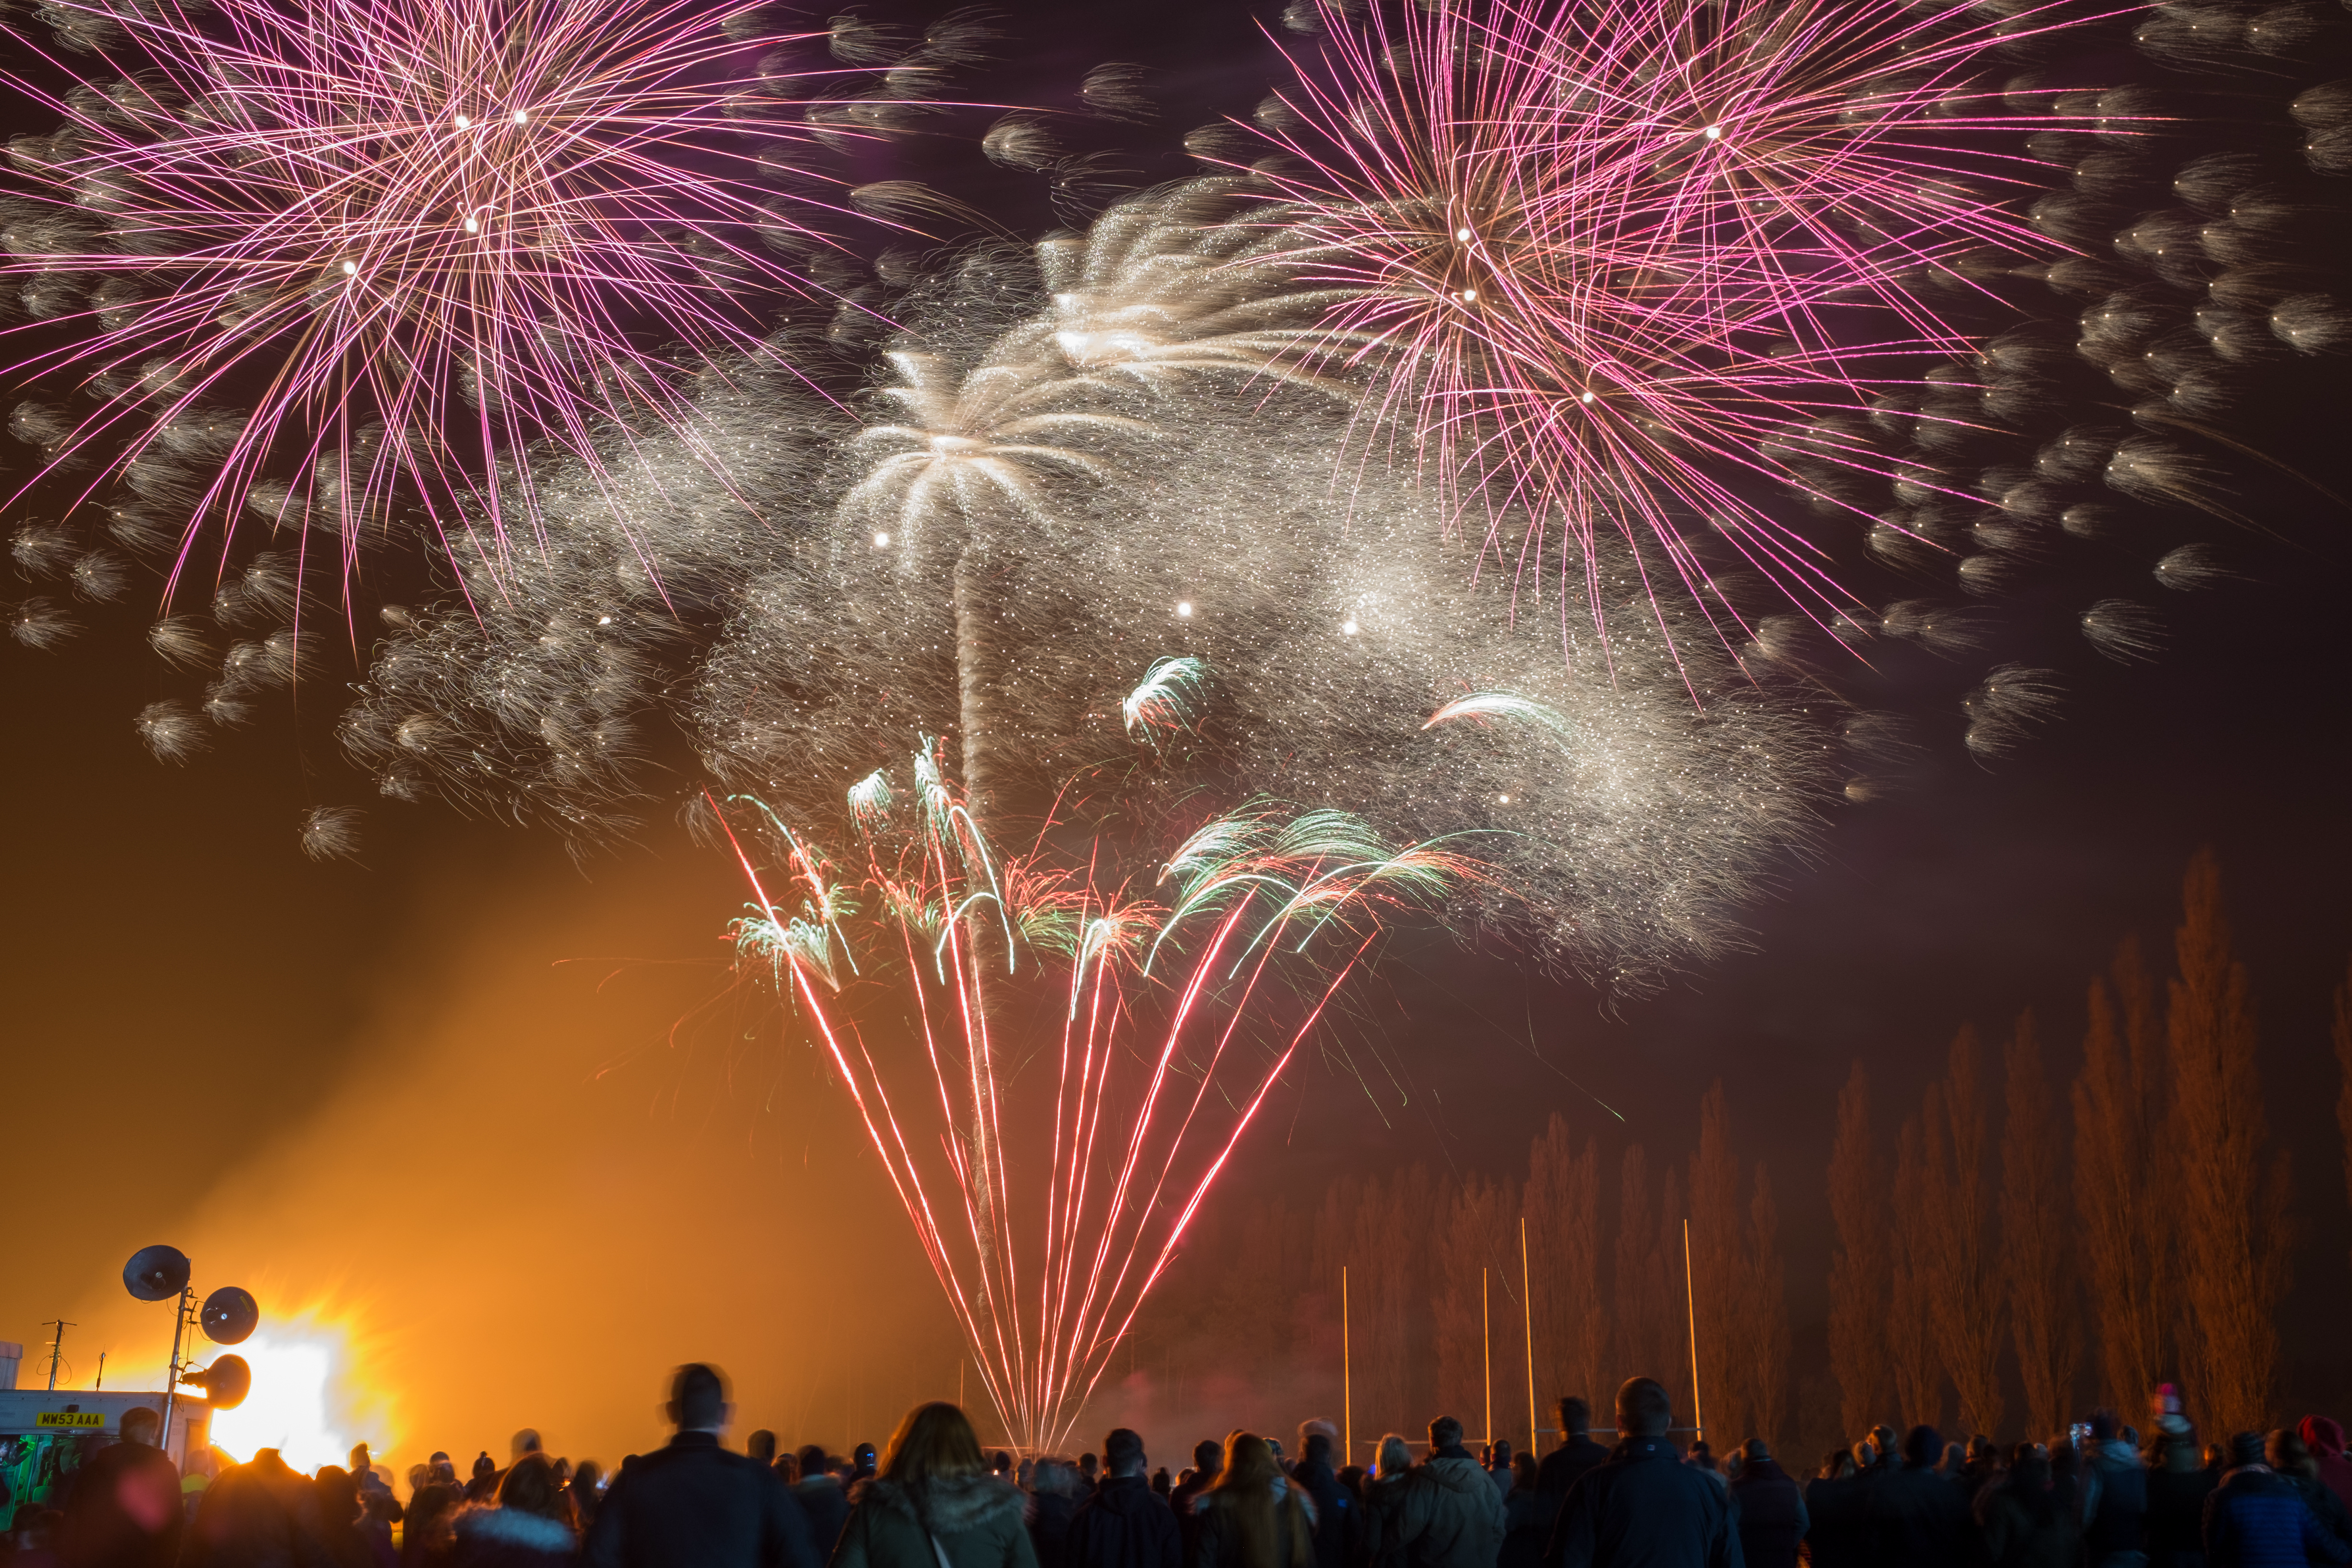 Let us know about your public firework display